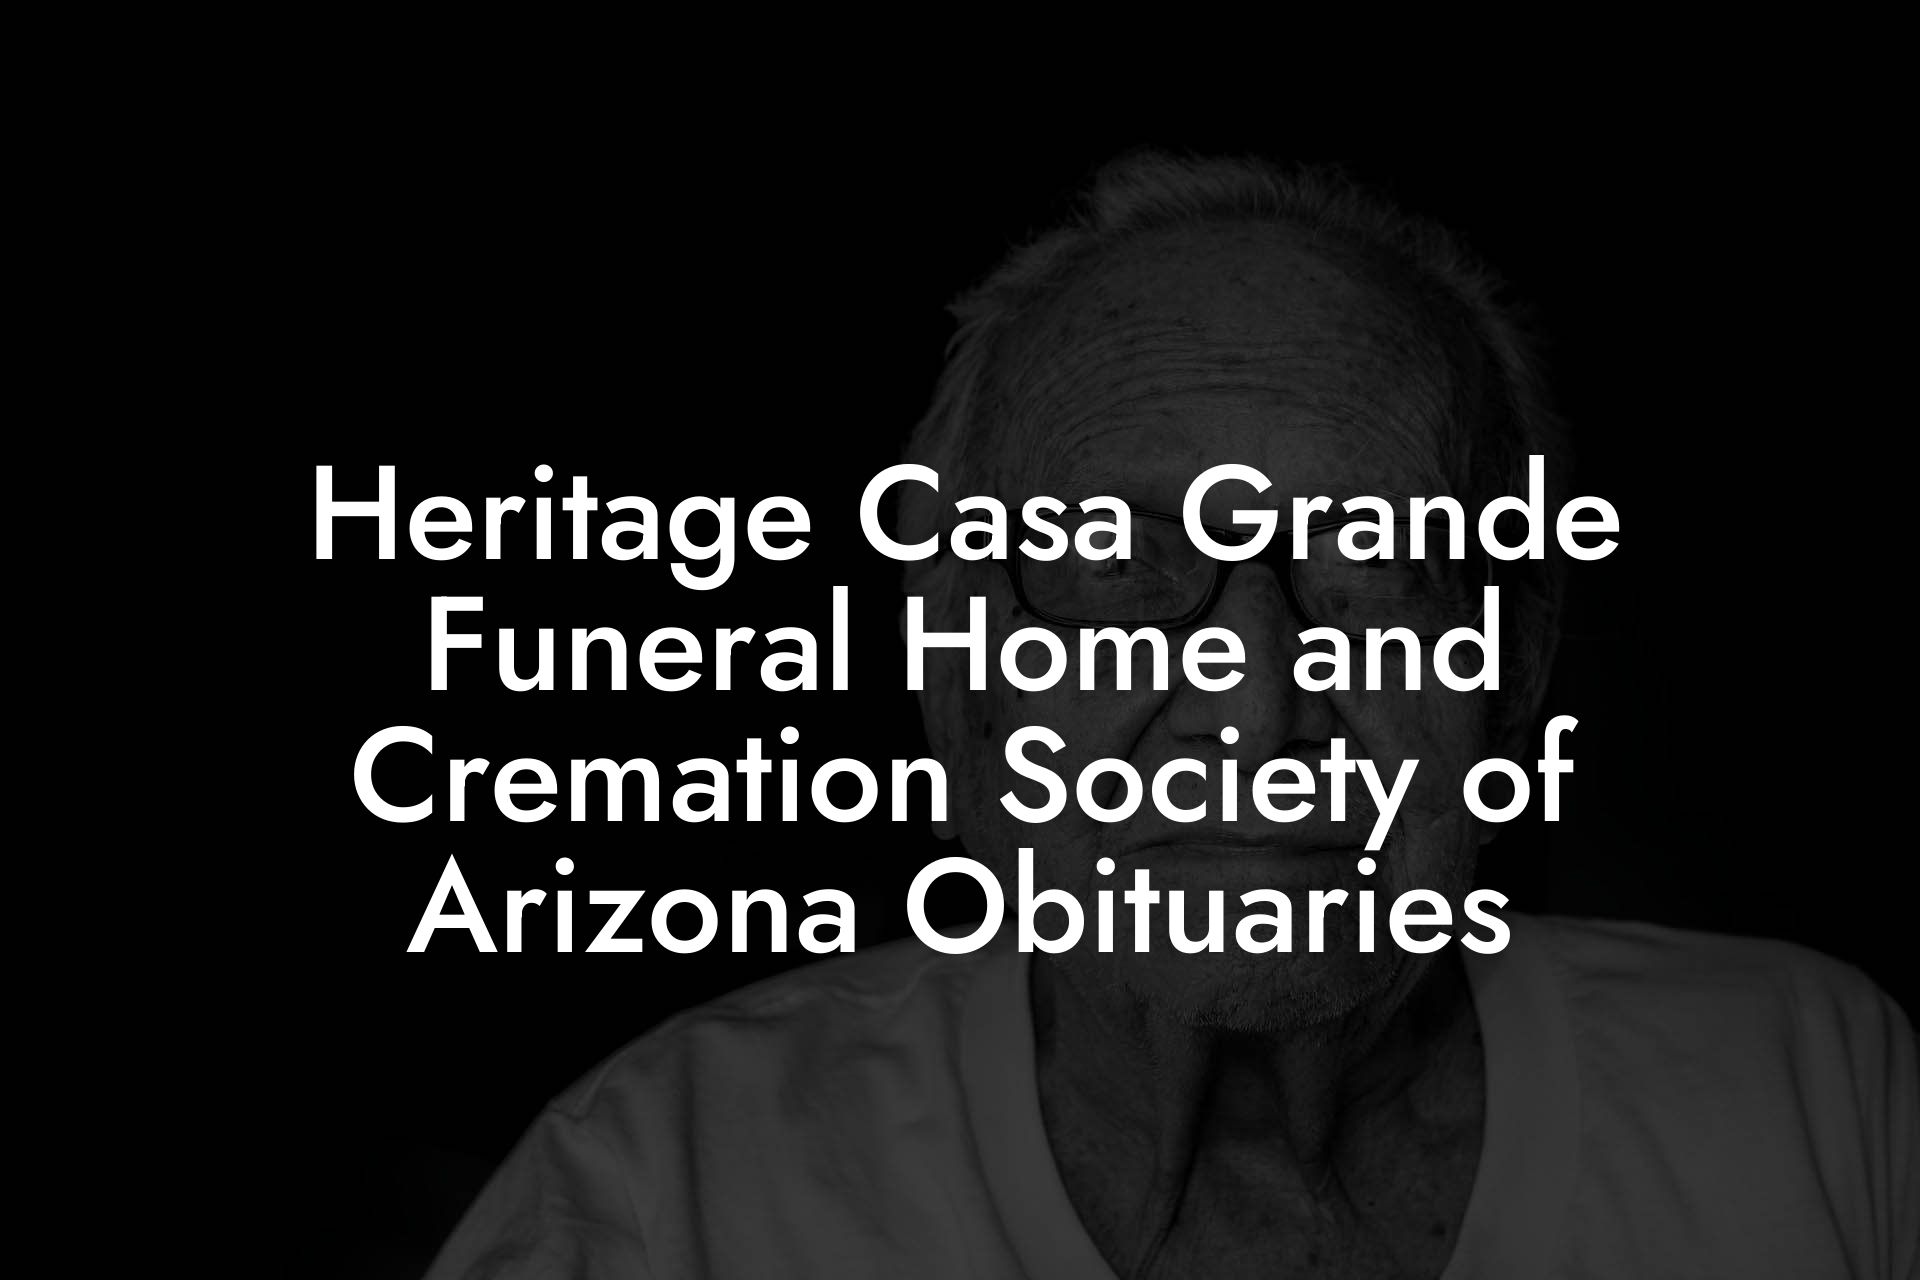 Heritage Casa Grande Funeral Home and Cremation Society of Arizona Obituaries